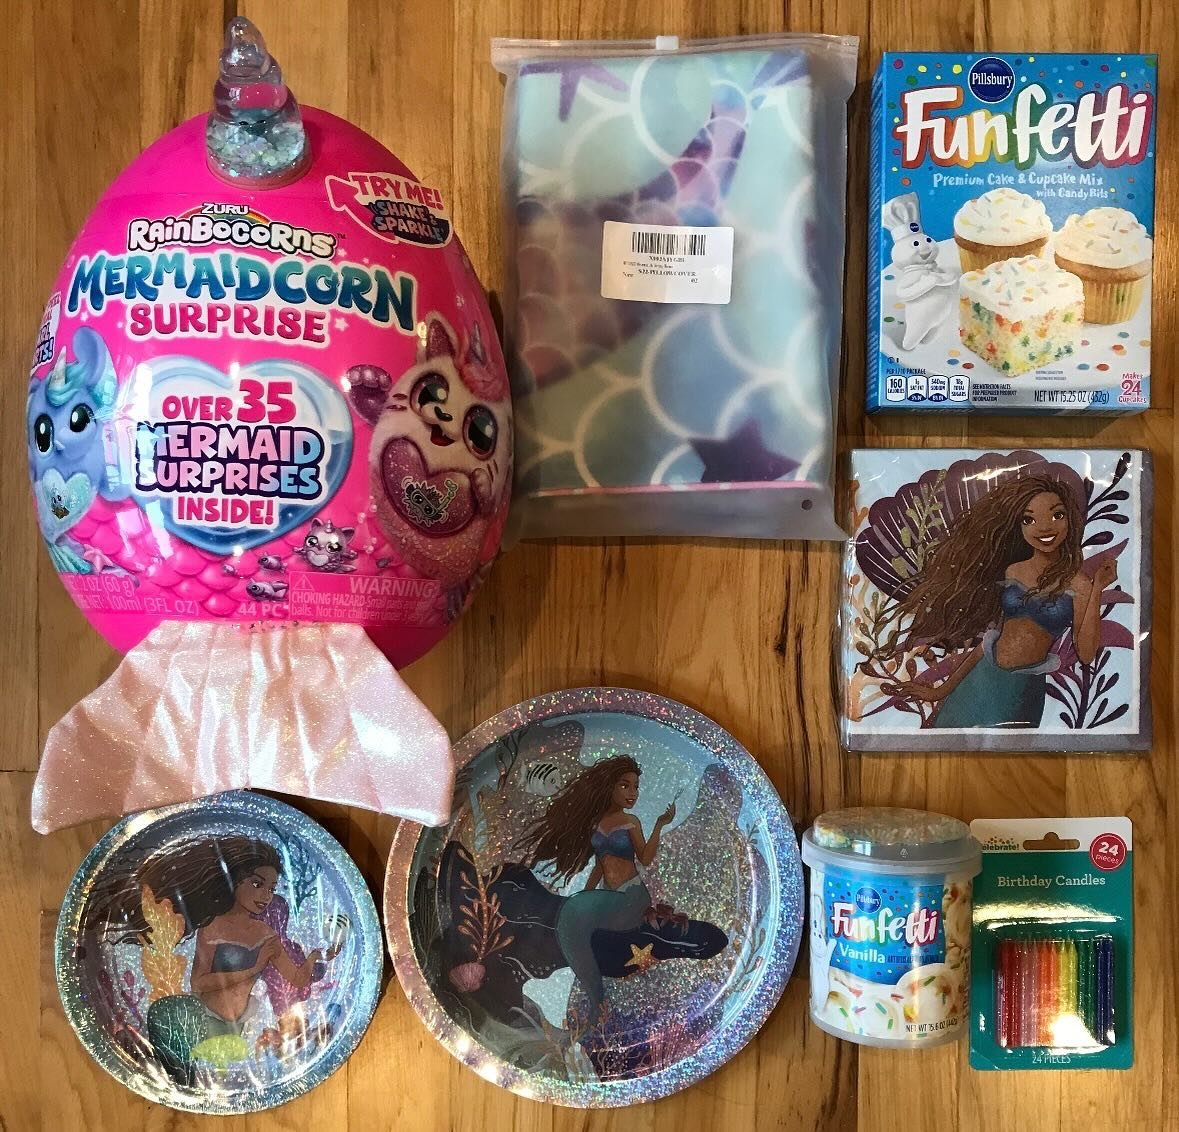 &ldquo;I&rsquo;m a loving mother of 5 amazing children and they deserve the best. We had a house fire a week before school started and we lost everything. You never know you miss something until you have lost it all.&rdquo;

This newest Birthday Kit 